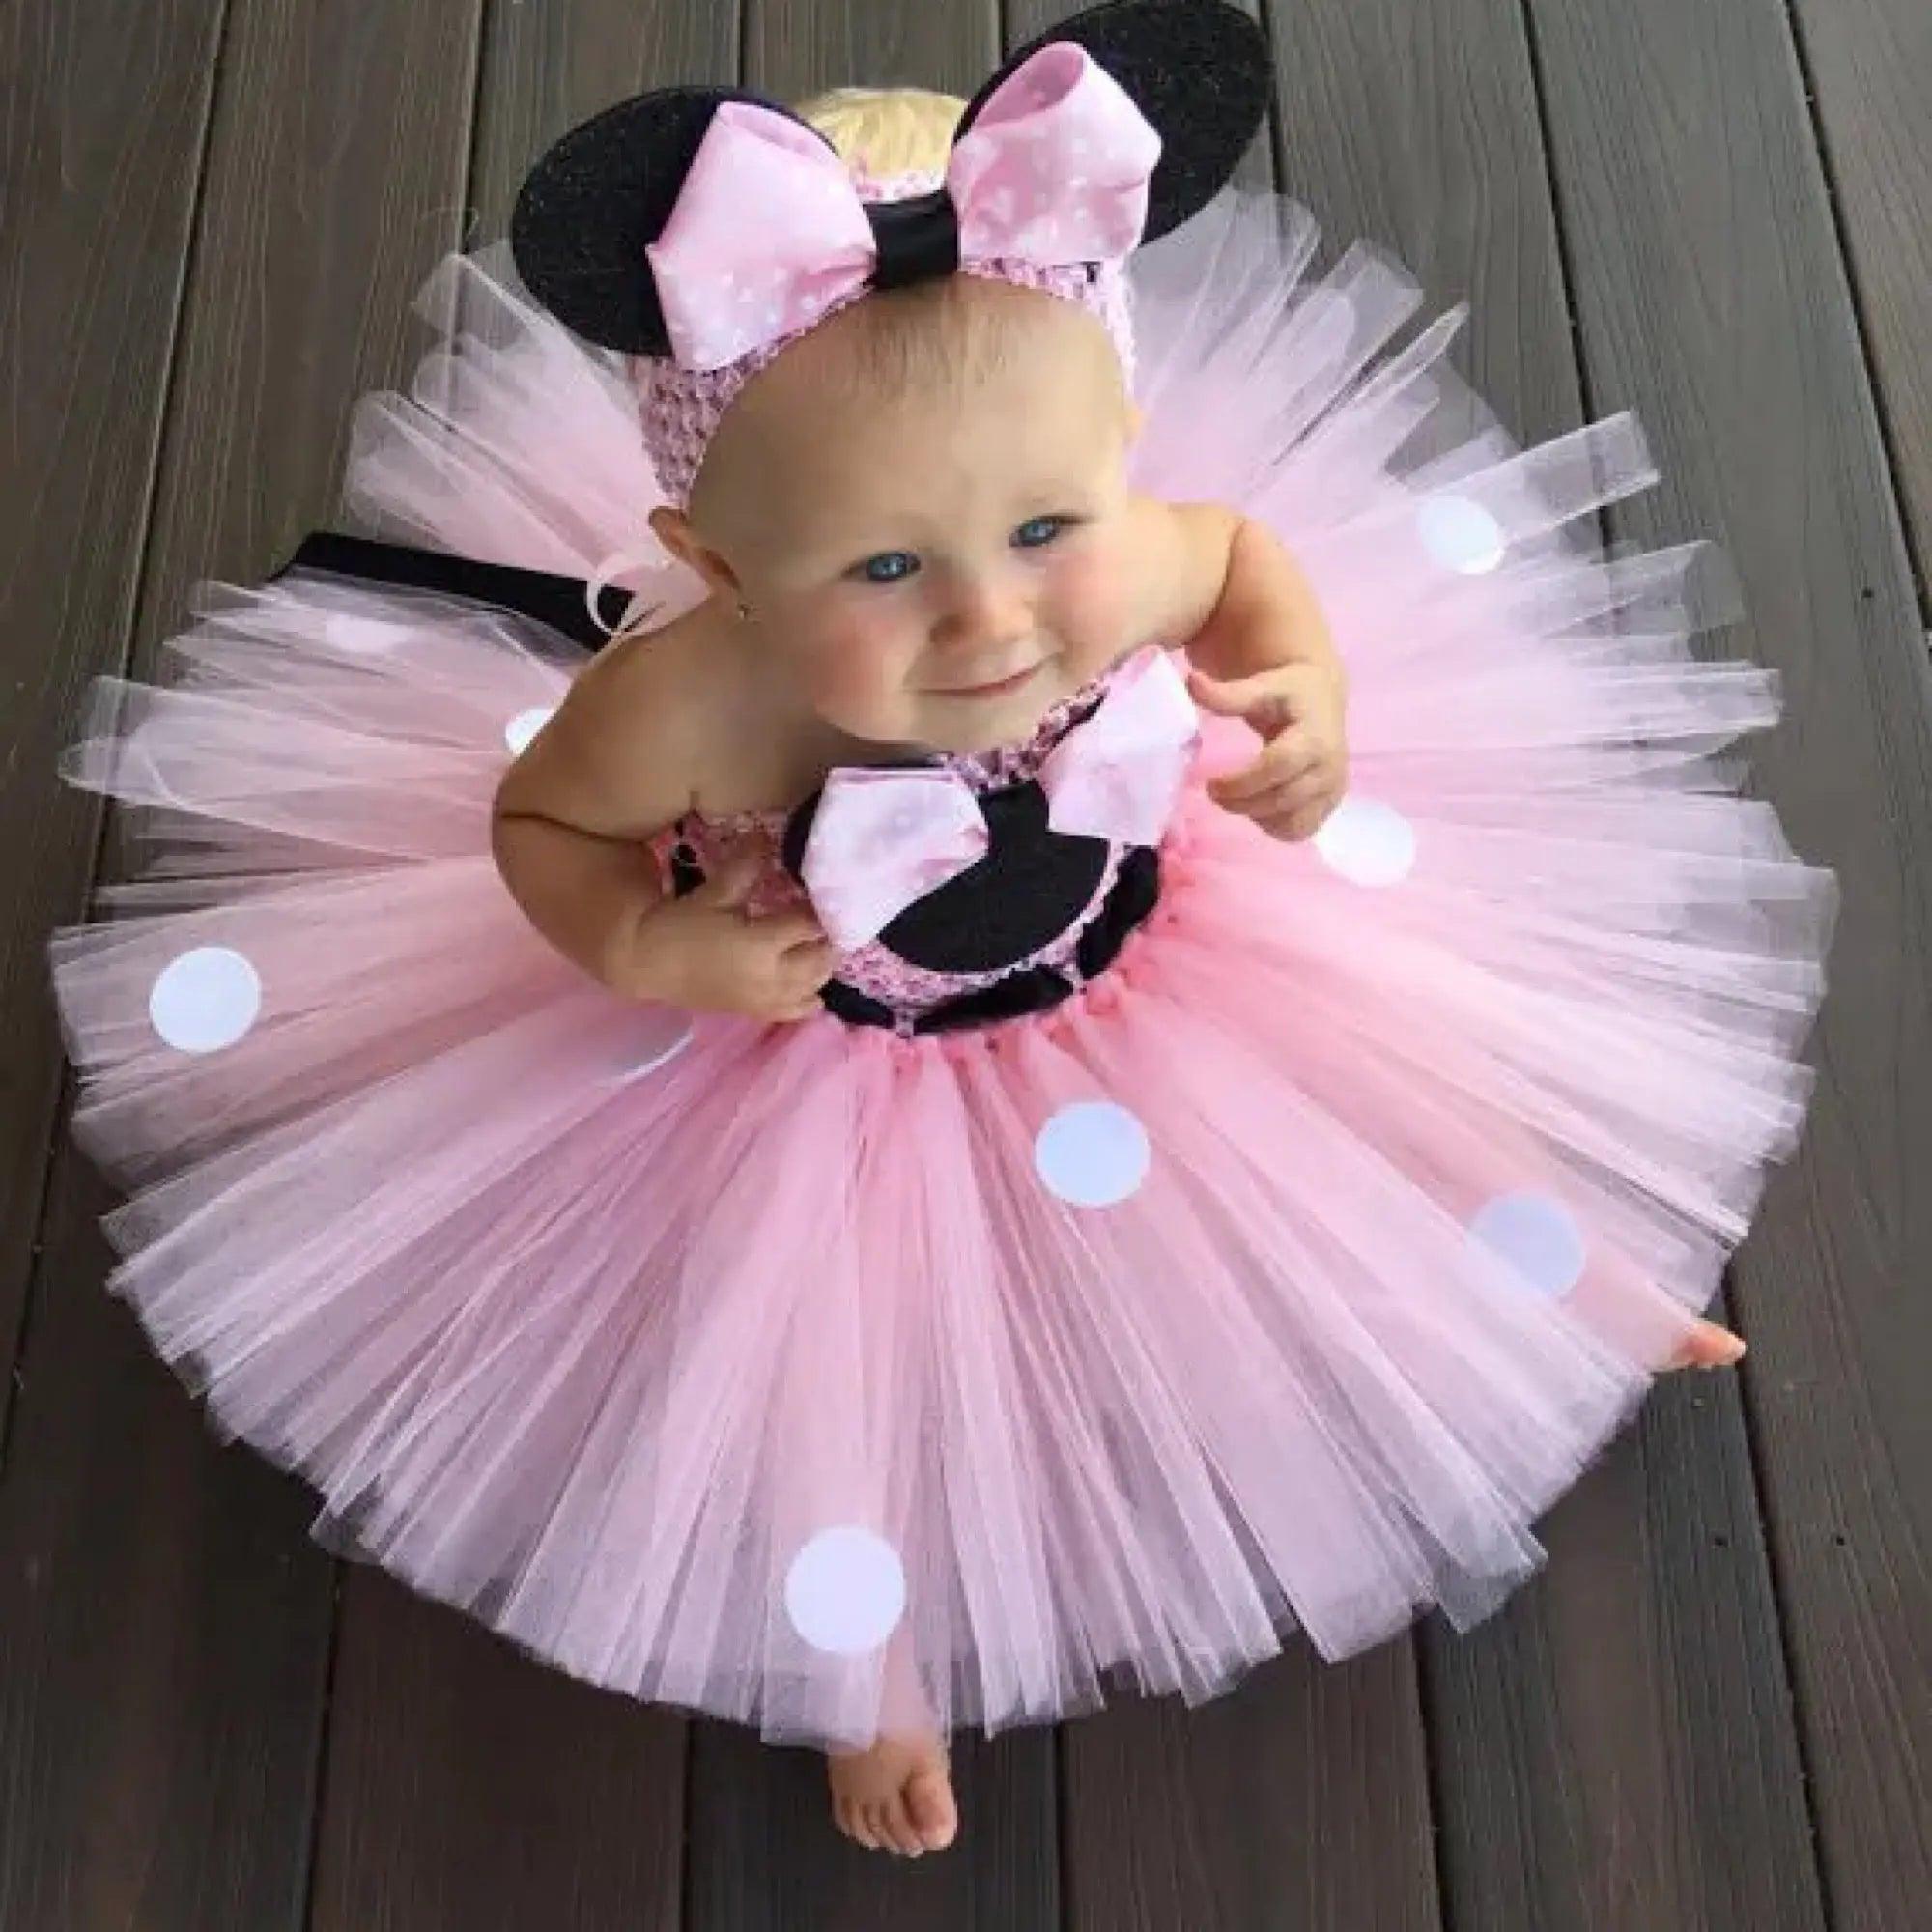 Baby Toddler Girls Crochet Minnie Mouse Tulle Tutu Dress and Headband Bling Bling Baby Boutique